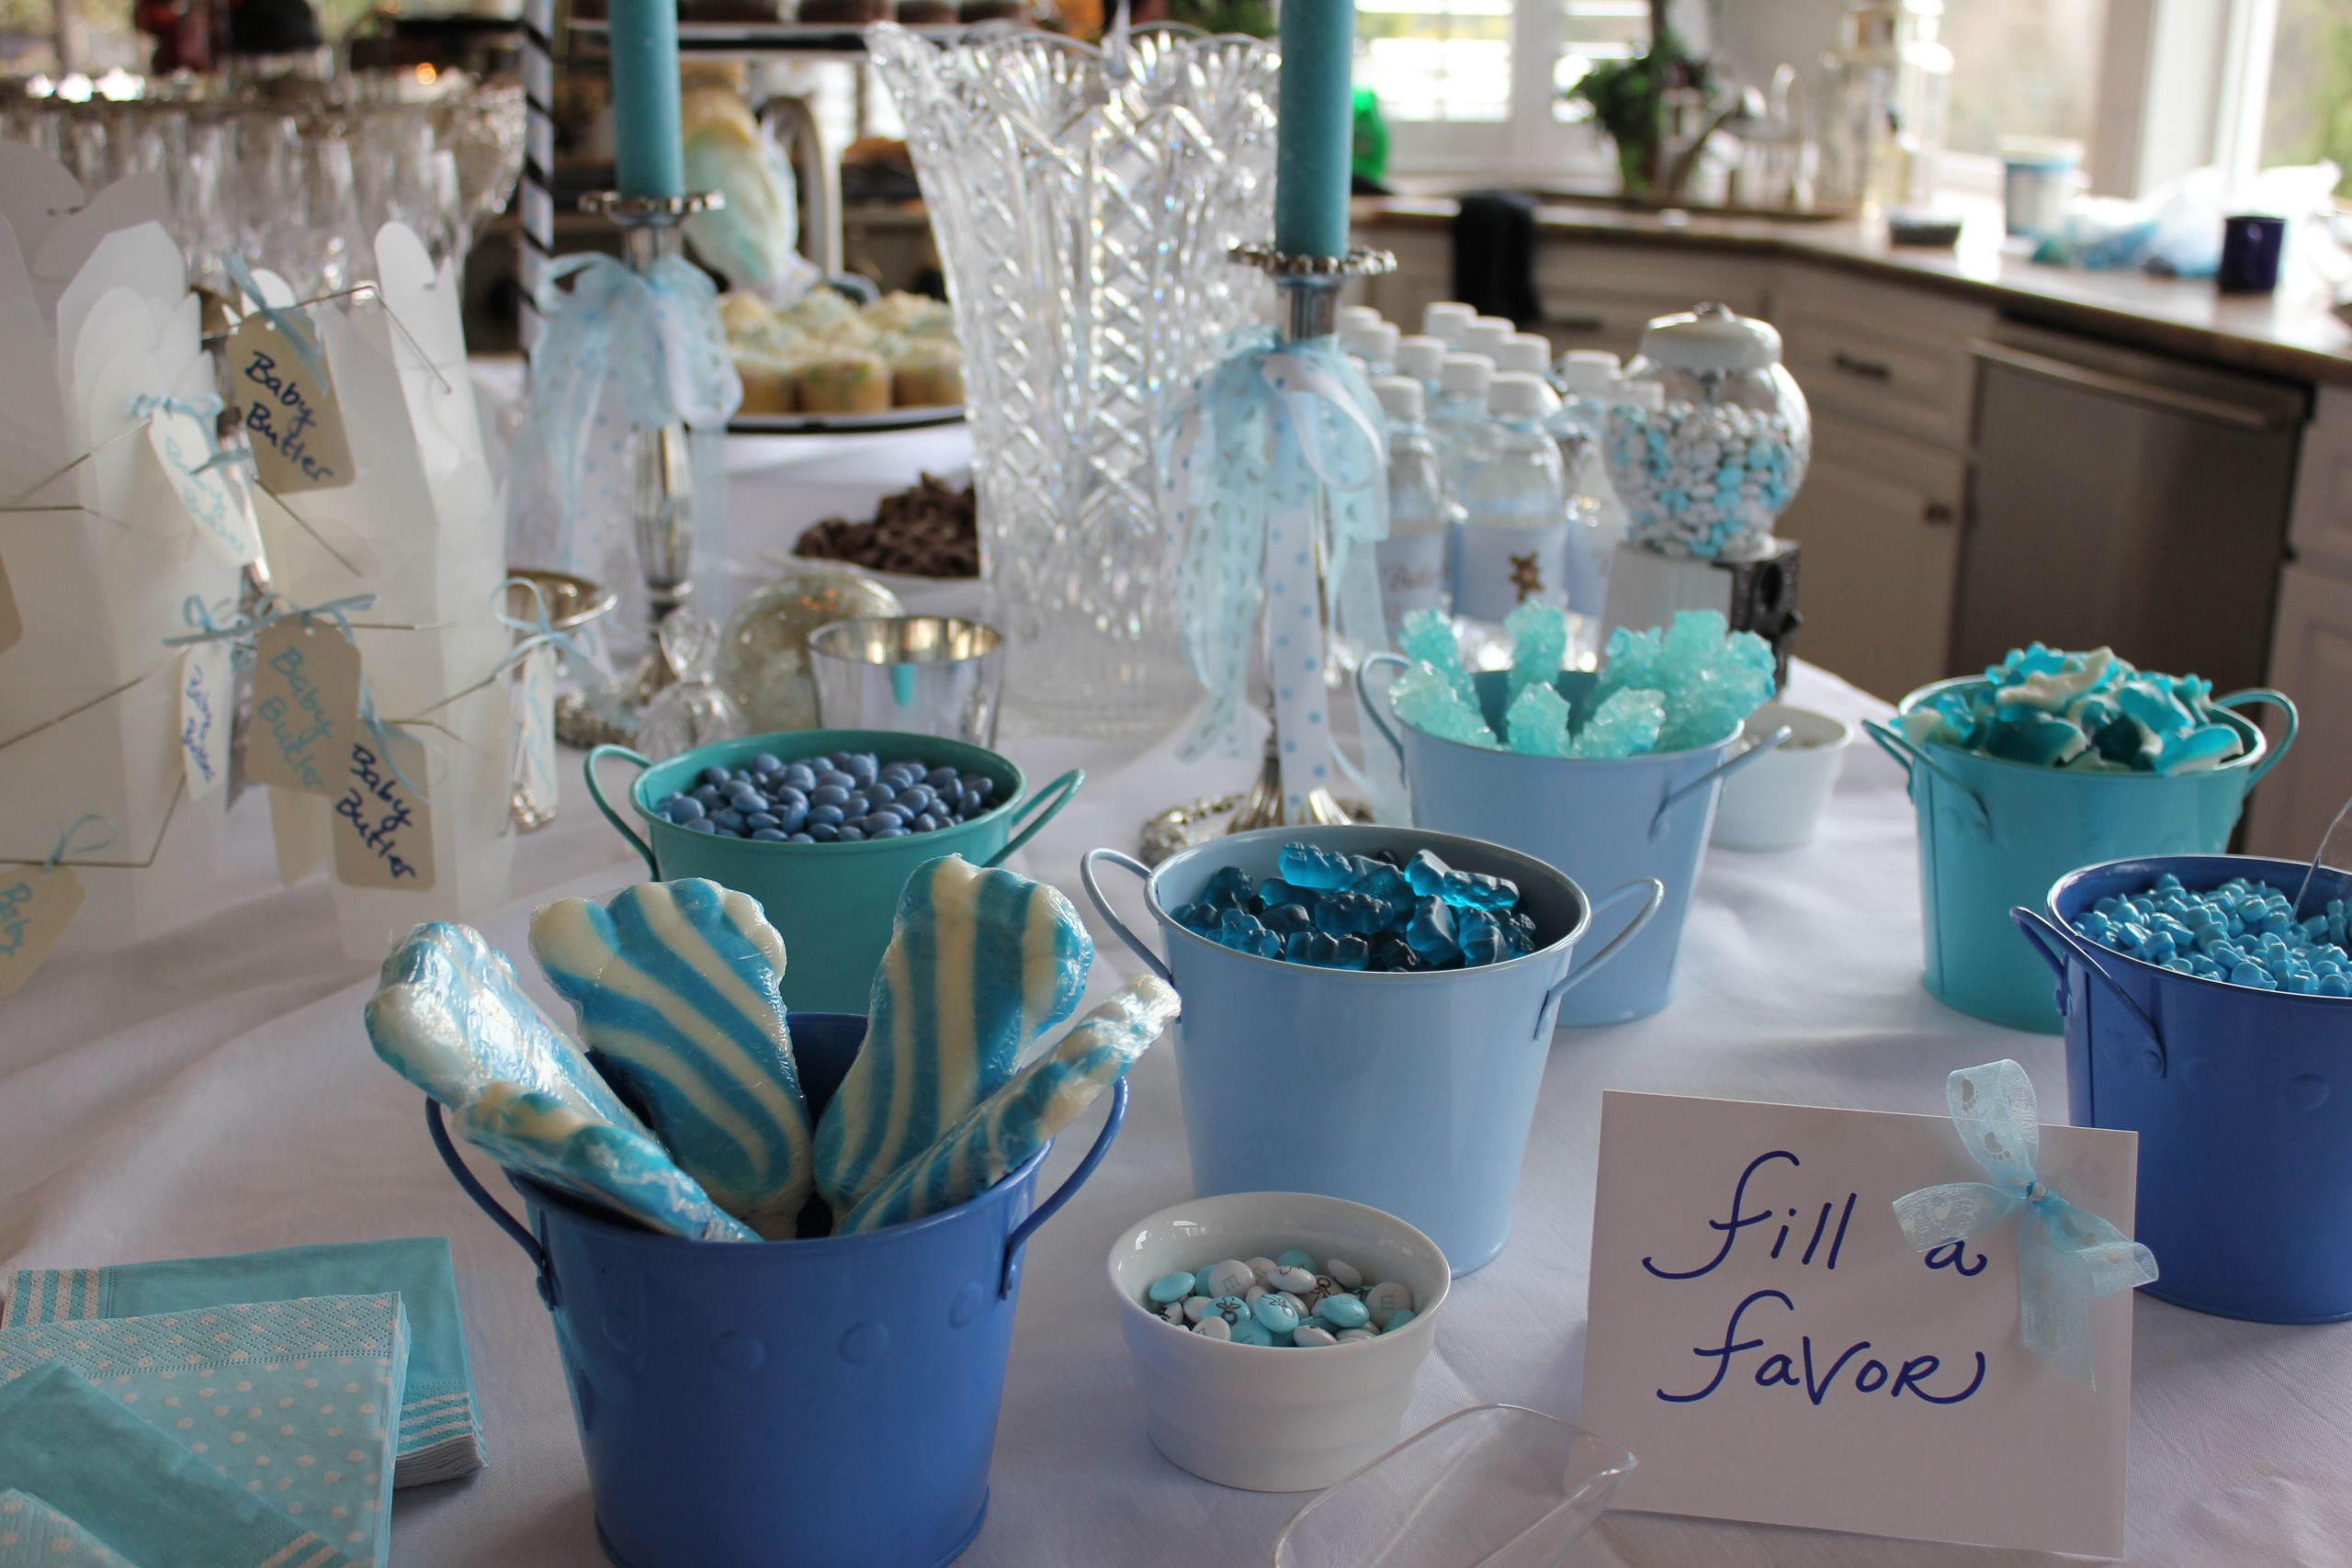 Boy Baby Shower Table Decoration Ideas
 Throwing a Baby Shower for a Boy